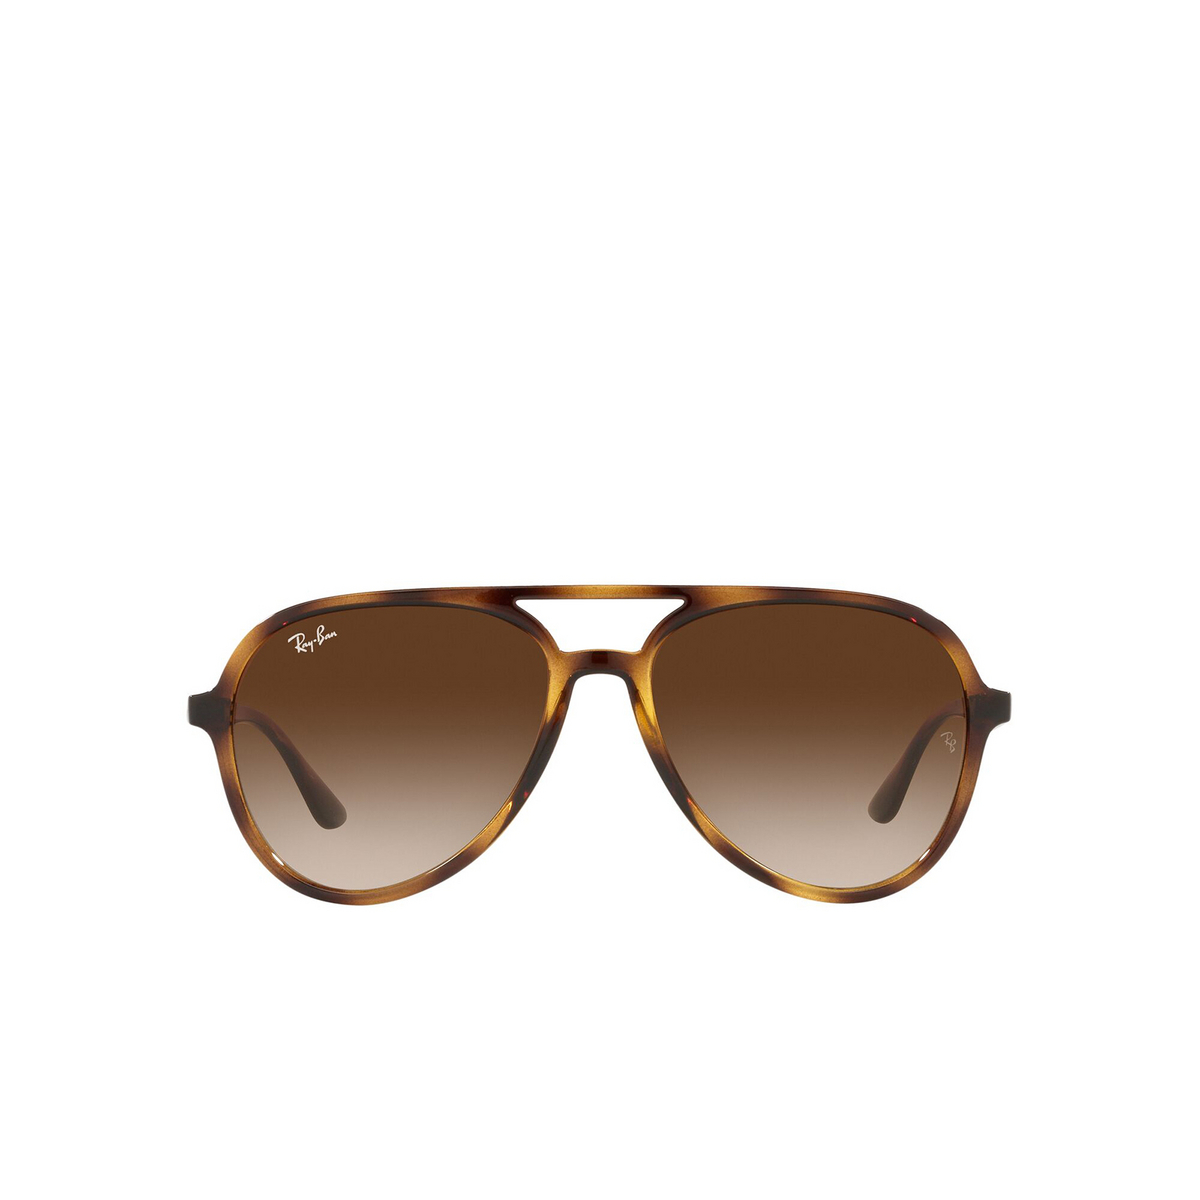 Ray-Ban® Aviator Sunglasses: RB4376 color Havana 710/13 - front view.